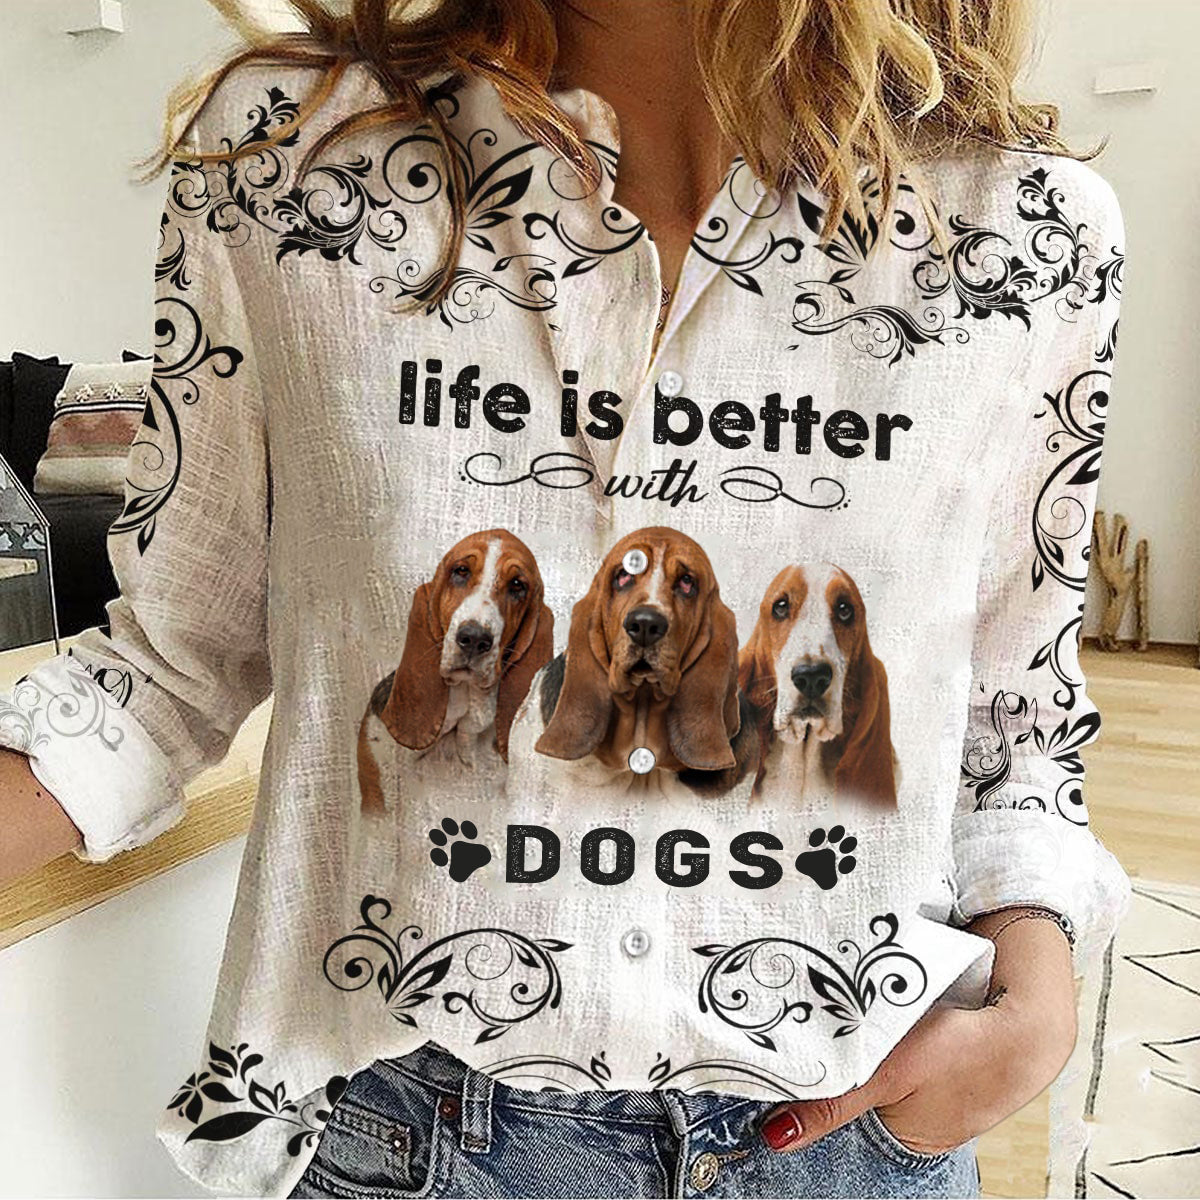 Basset Hound -Life Is Better With Dogs Women's Long-Sleeve Shirt